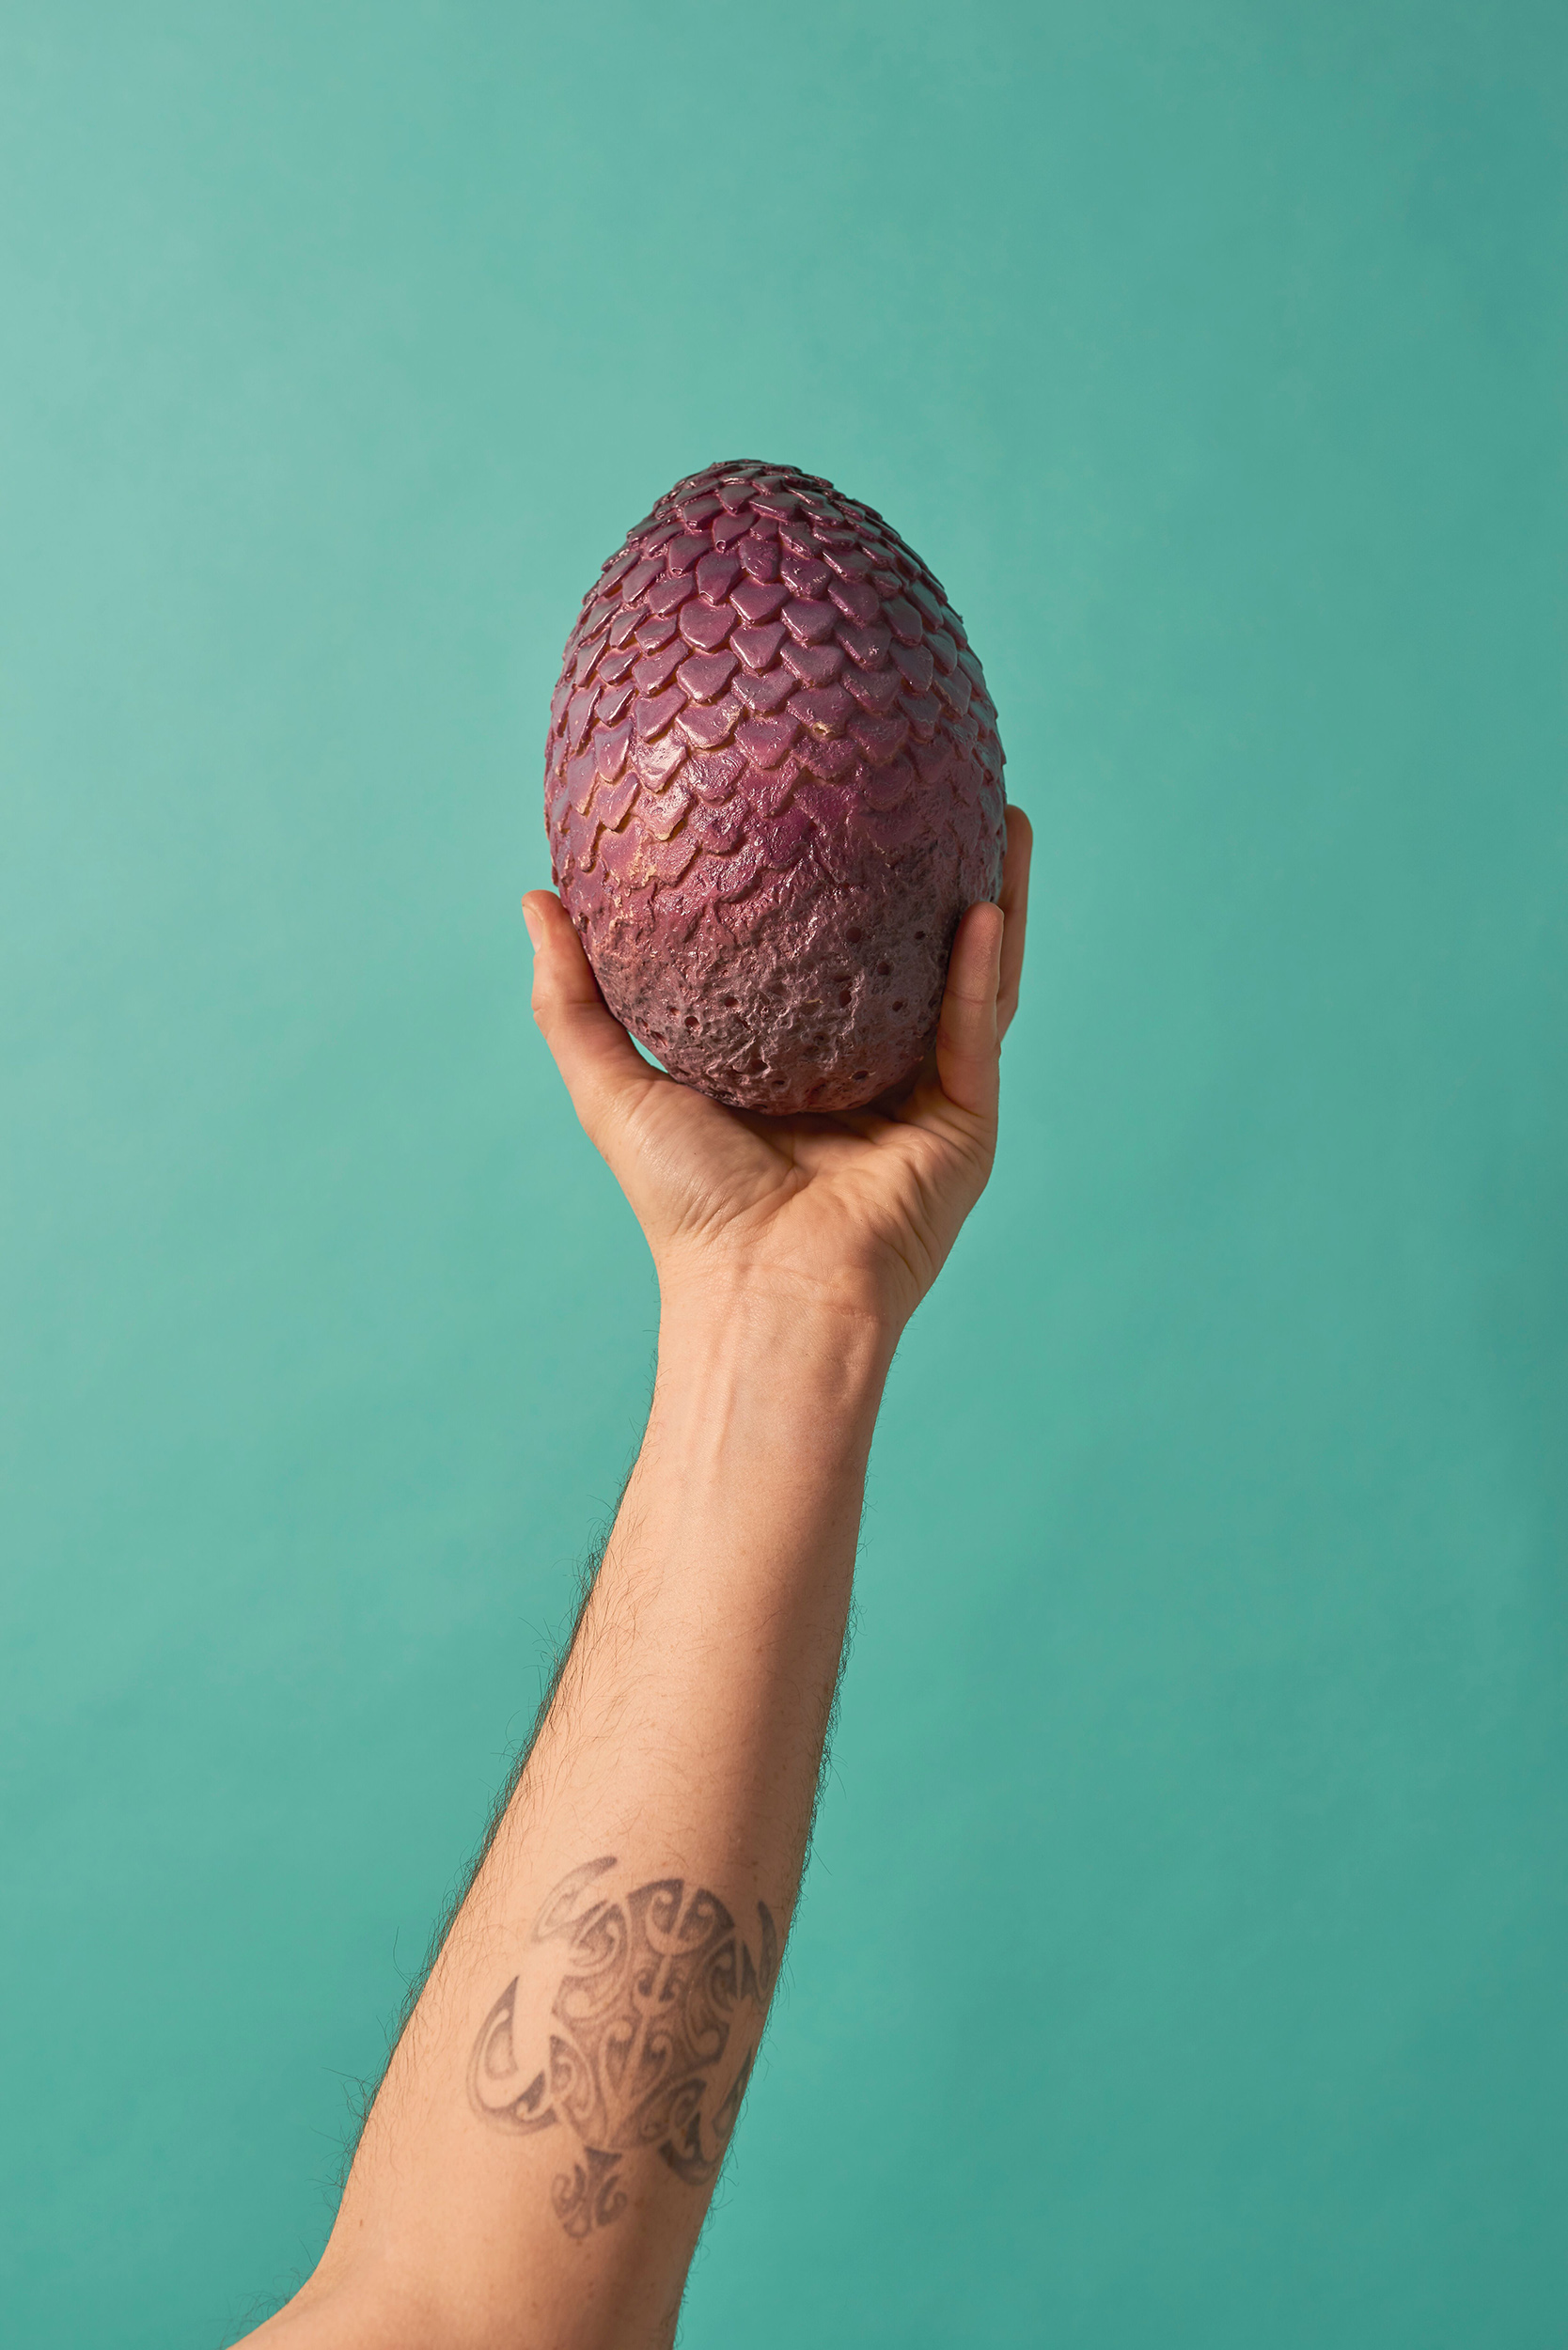 PHOTO: British food delivery service Deliveroo is out with "Game of Thrones" inspired chocolate dragon eggs ahead of the show's new season.